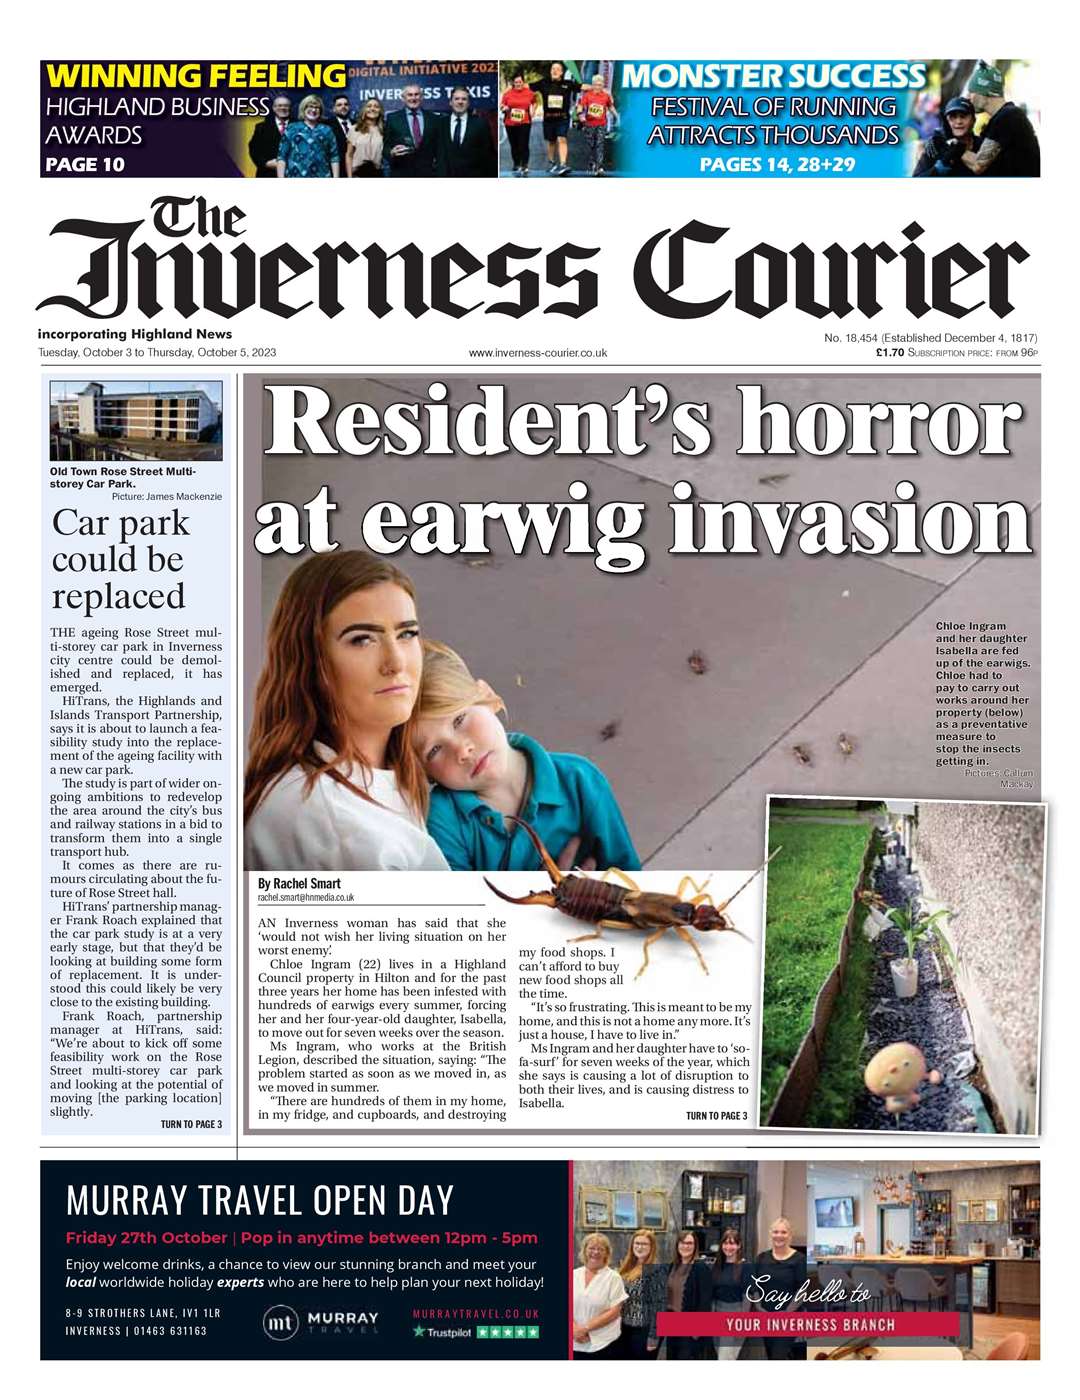 The Inverness Courier, October 3, front page.